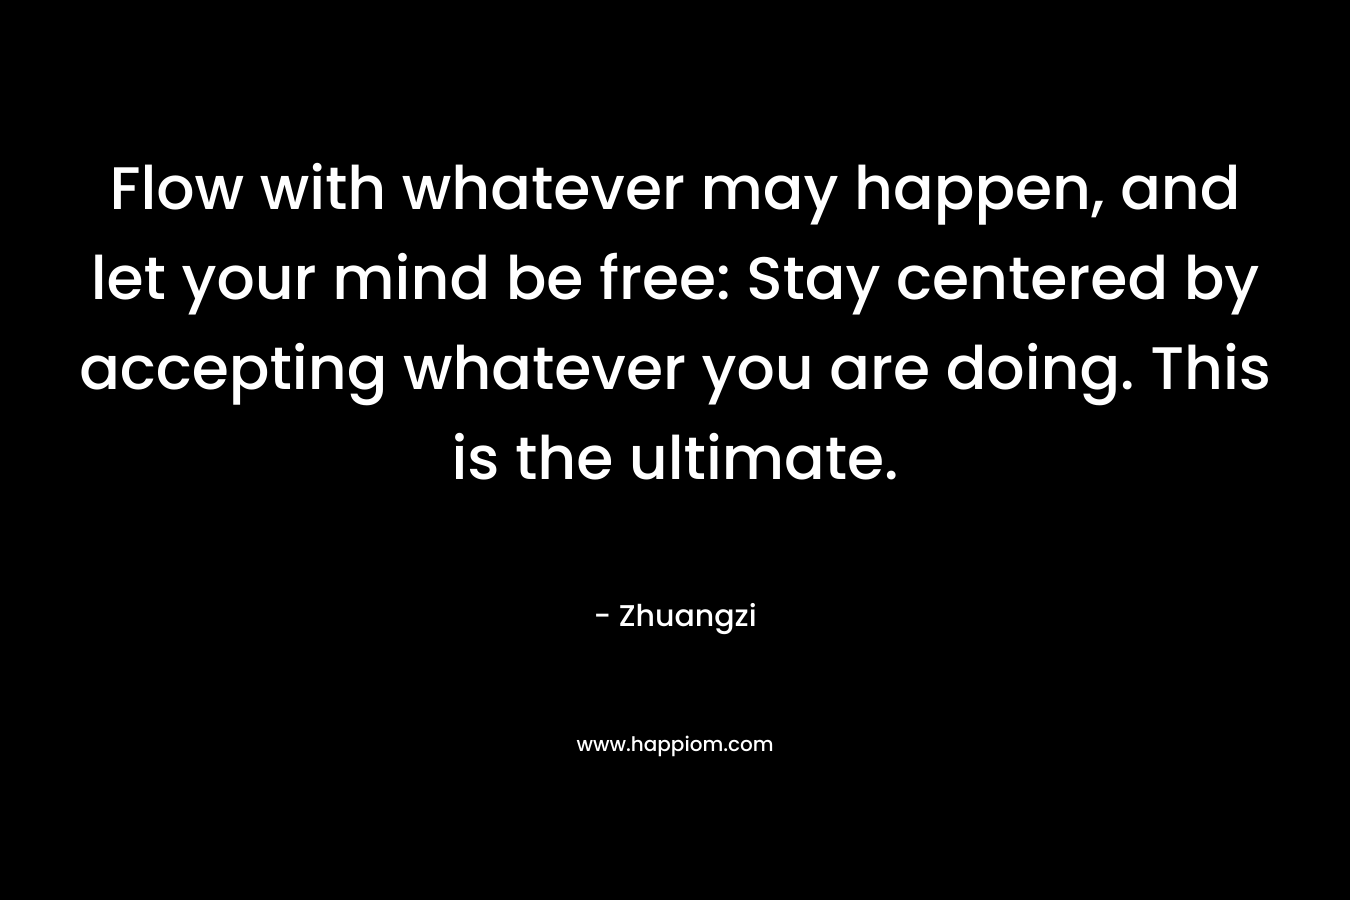 Flow with whatever may happen, and let your mind be free: Stay centered by accepting whatever you are doing. This is the ultimate. – Zhuangzi